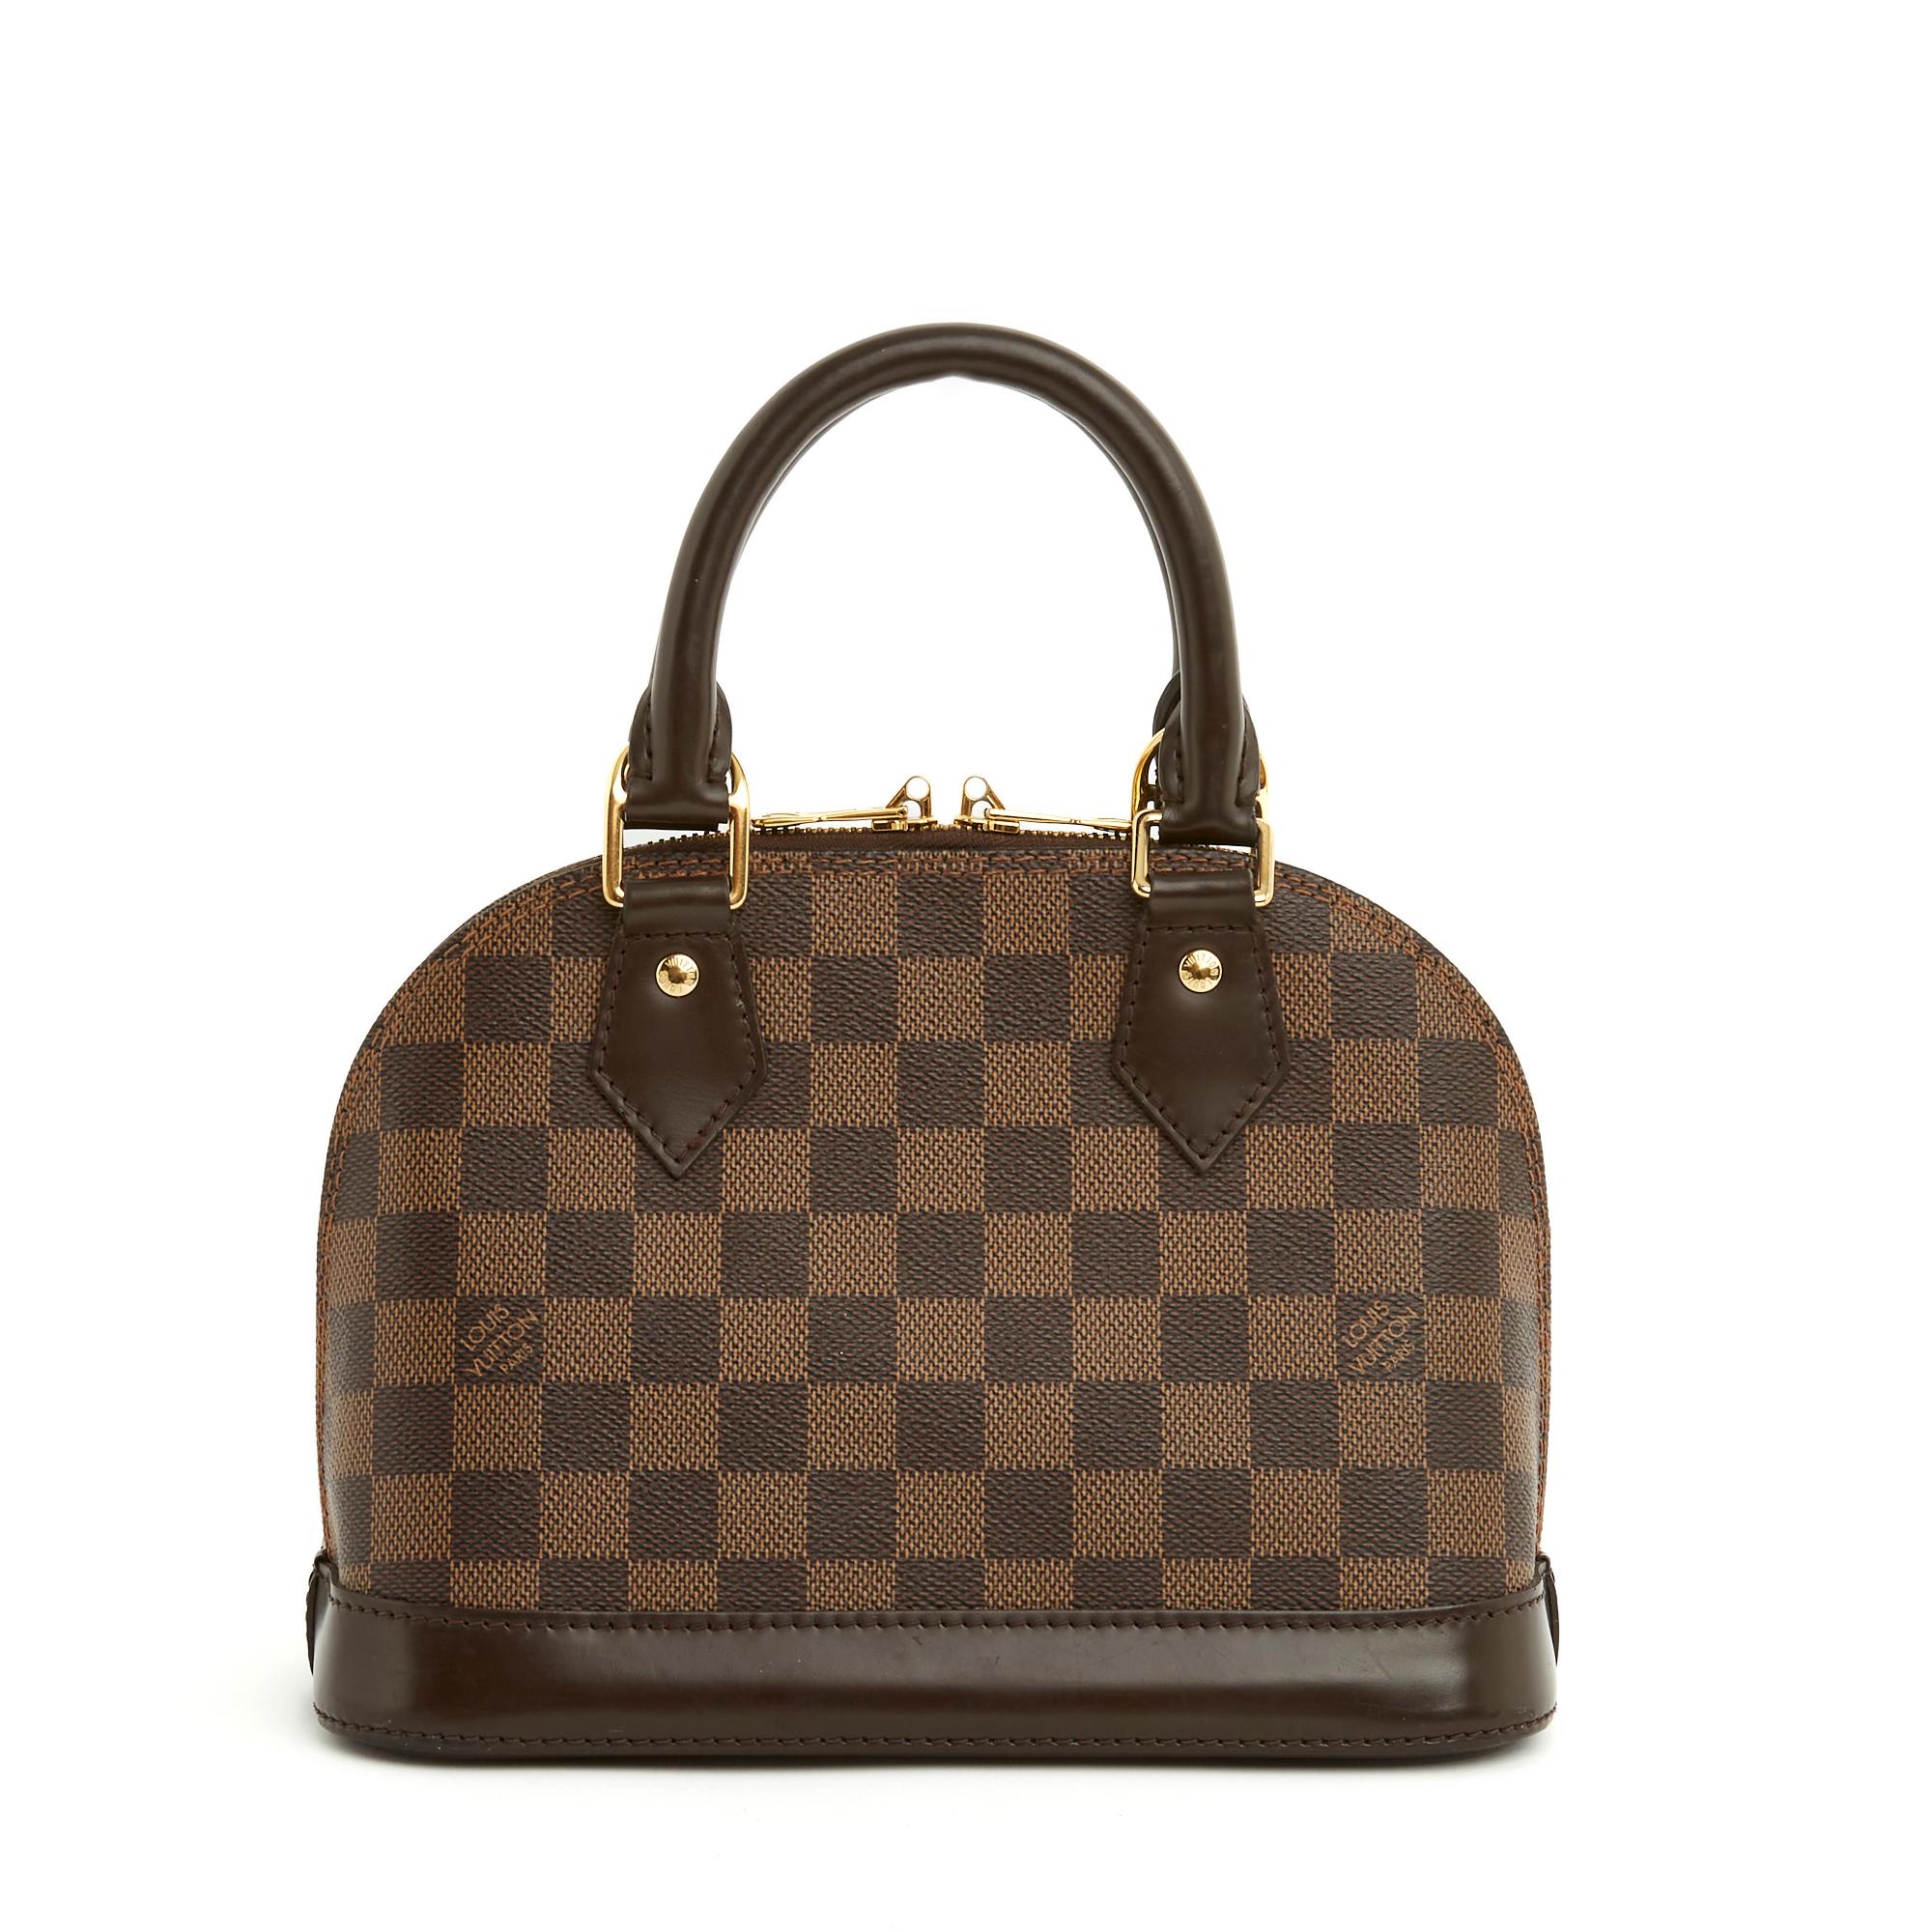 Louis Vuitton Alma model BB bag in checkerboard pattern coated canvas and brown leather, 2 handles for carrying in the hand, red canvas interior with 1 patch pocket, double-slider zip closure with LV logo, long thin adjustable and removable shoulder